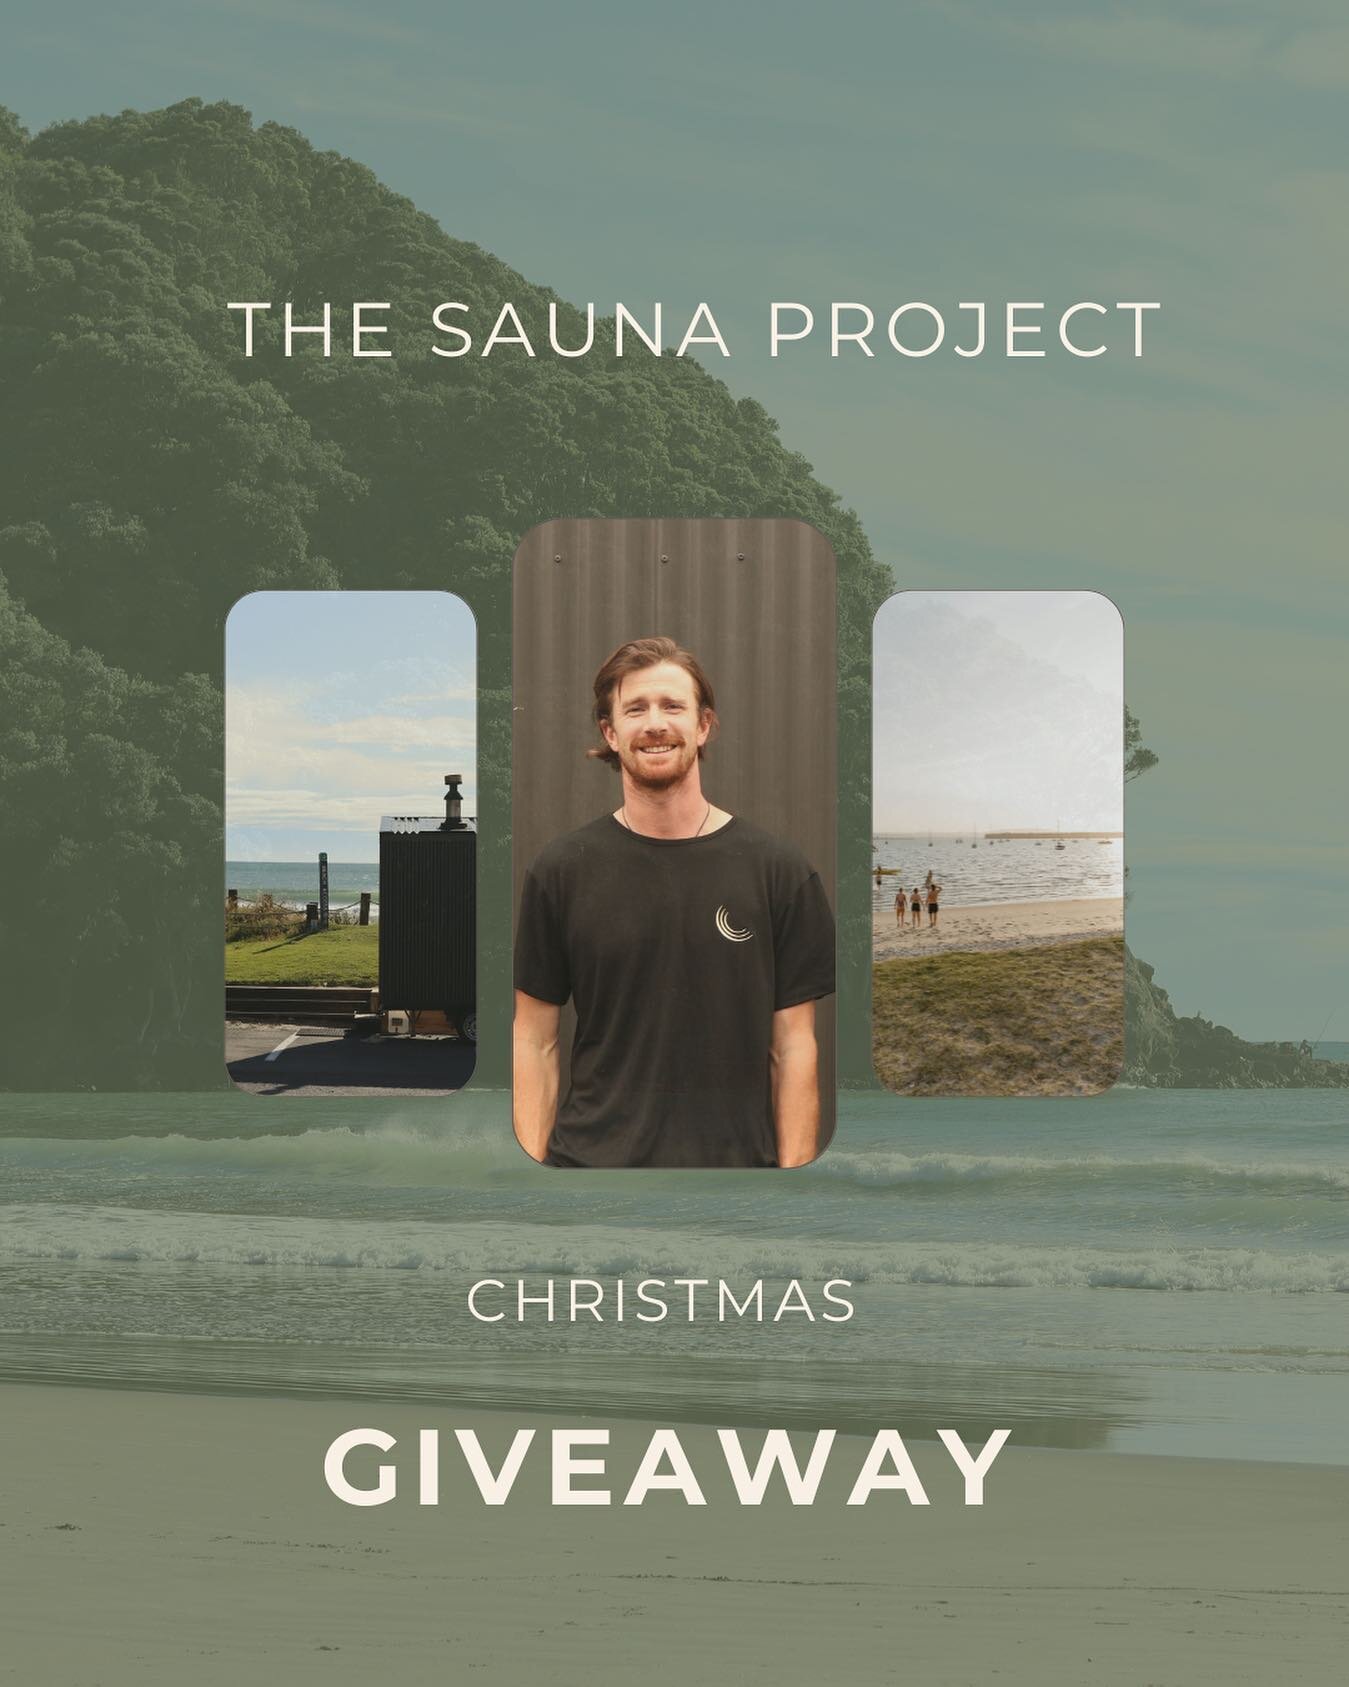 Christmas sauna giveaway time! 

With Christmas just around the corner, we&rsquo;d like to celebrate with you by giving away some stuff 🥳 

This could be the perfect gift for someone if you&rsquo;re scratching your head on what to get! 

What you wi